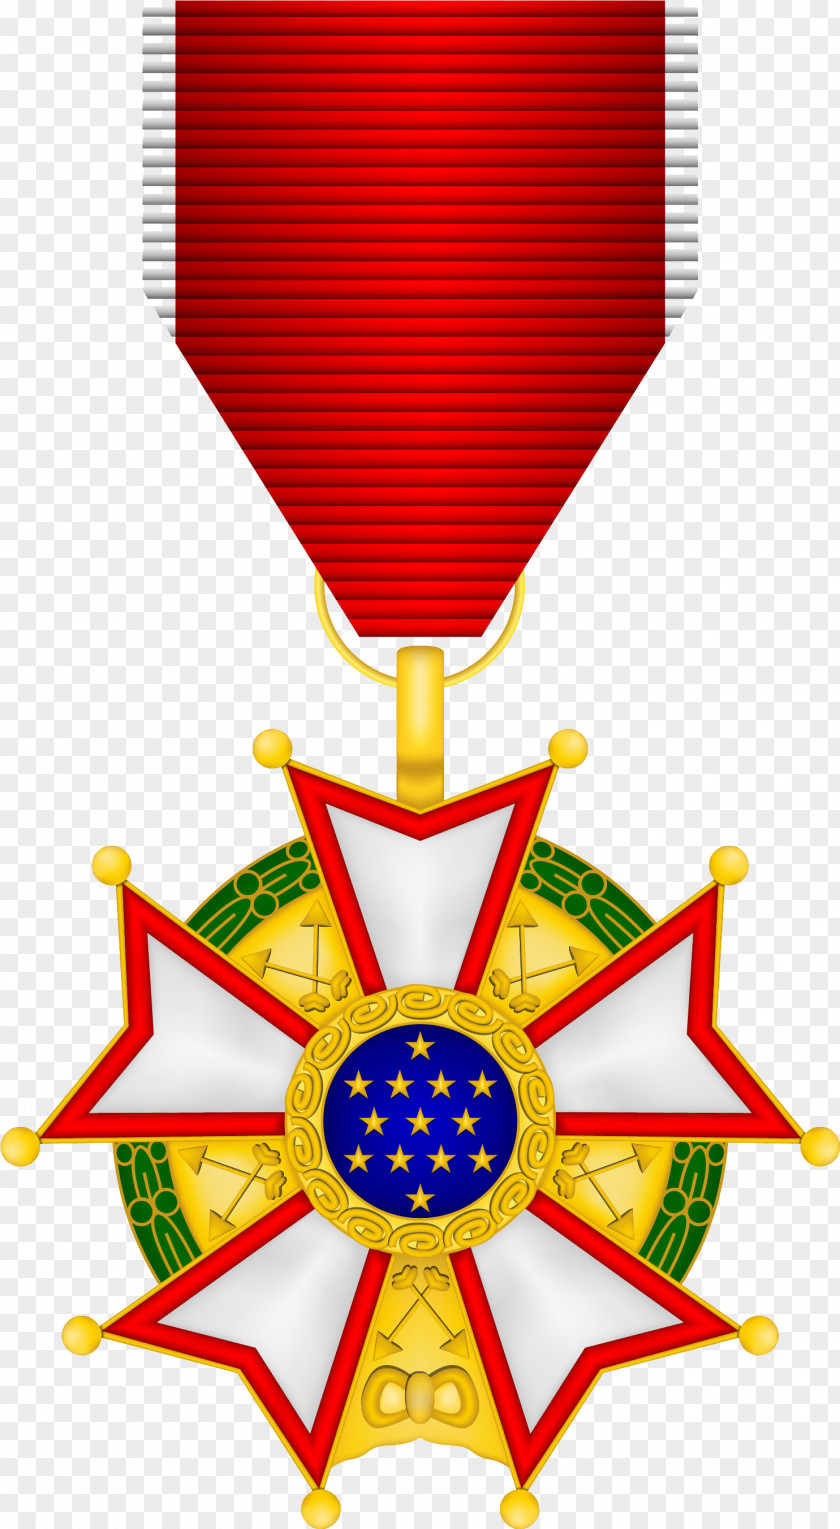 Victory Clipart United States Armed Forces Legion Of Merit Military Awards And Decorations PNG